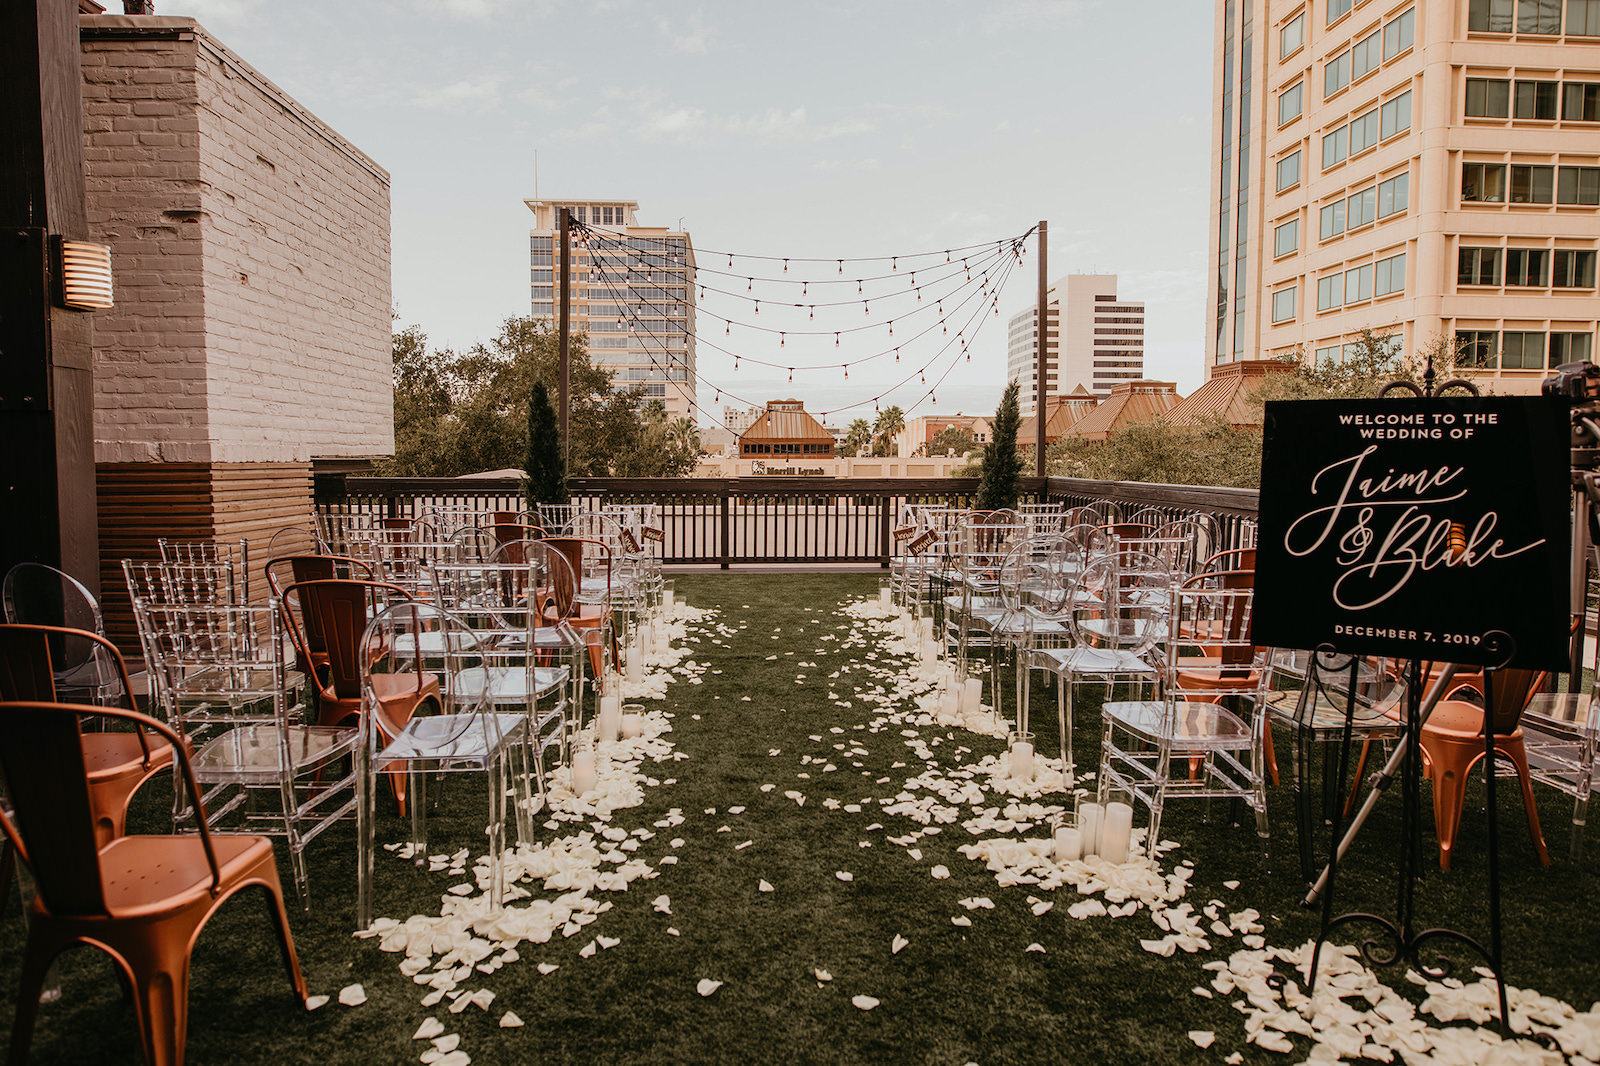 Modern Rooftop Wedding Ceremony with City Skyline and Mismatched Clear Acrylic Chairs and Industrial Copper Chairs | Unique, Historic Downtown St. Pete Wedding Venue Station House | St. Petersburg Wedding Planner Blue Skies Events